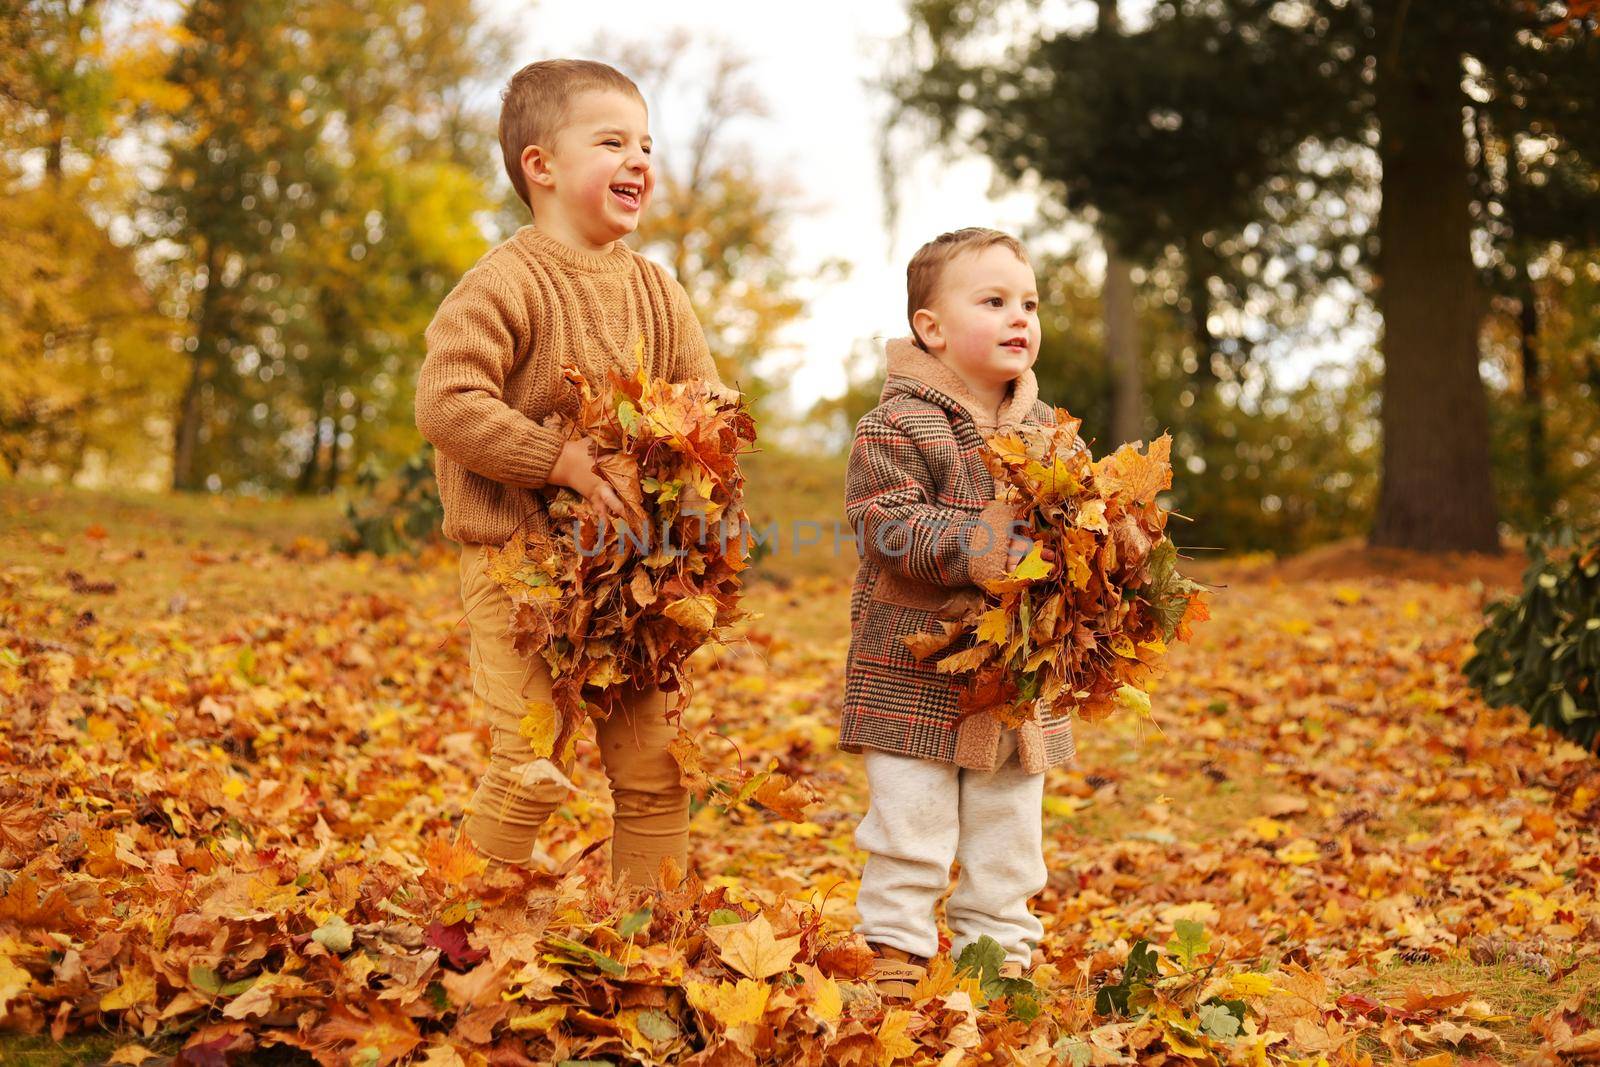 Outdoor fun in autumn. Children playing with autumn fallen leaves in park. Happy little friends